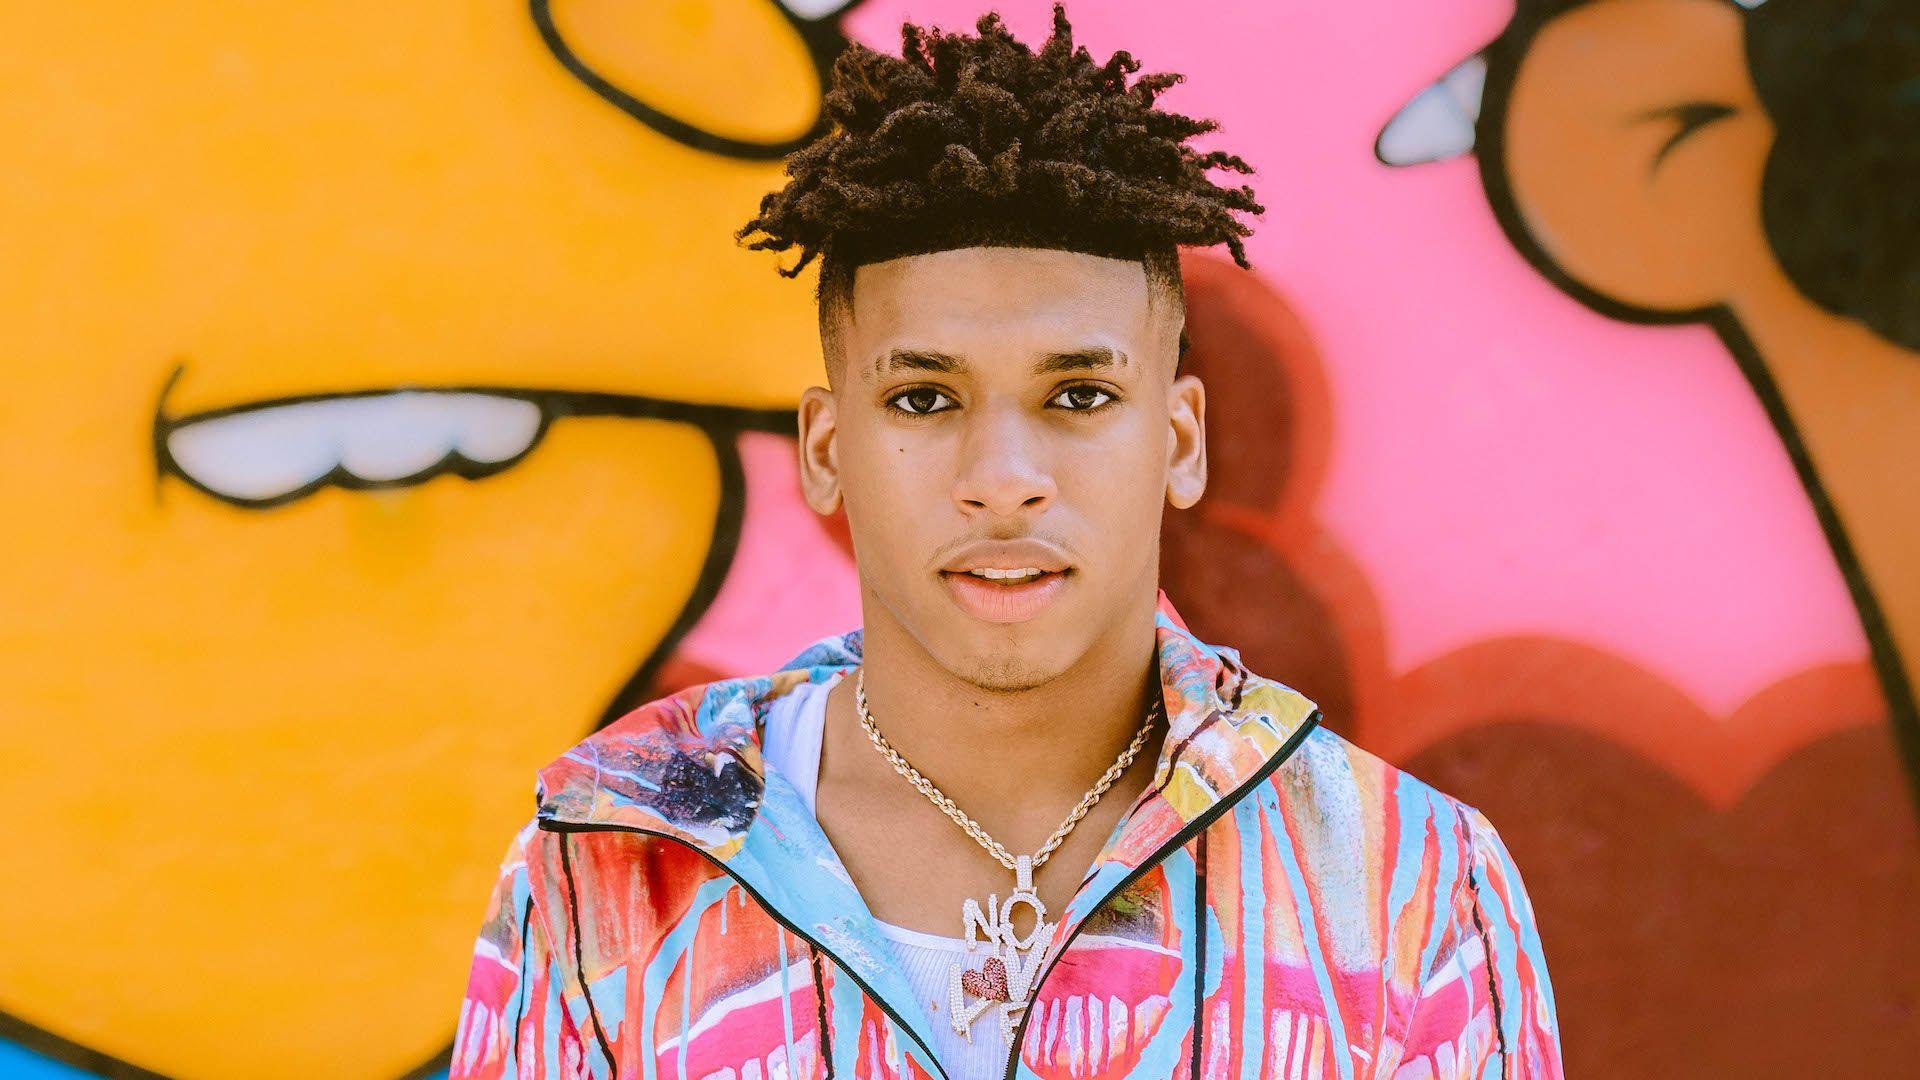 Meet NLE Choppa, the Memphis Prodigy With the Shotta Flow.